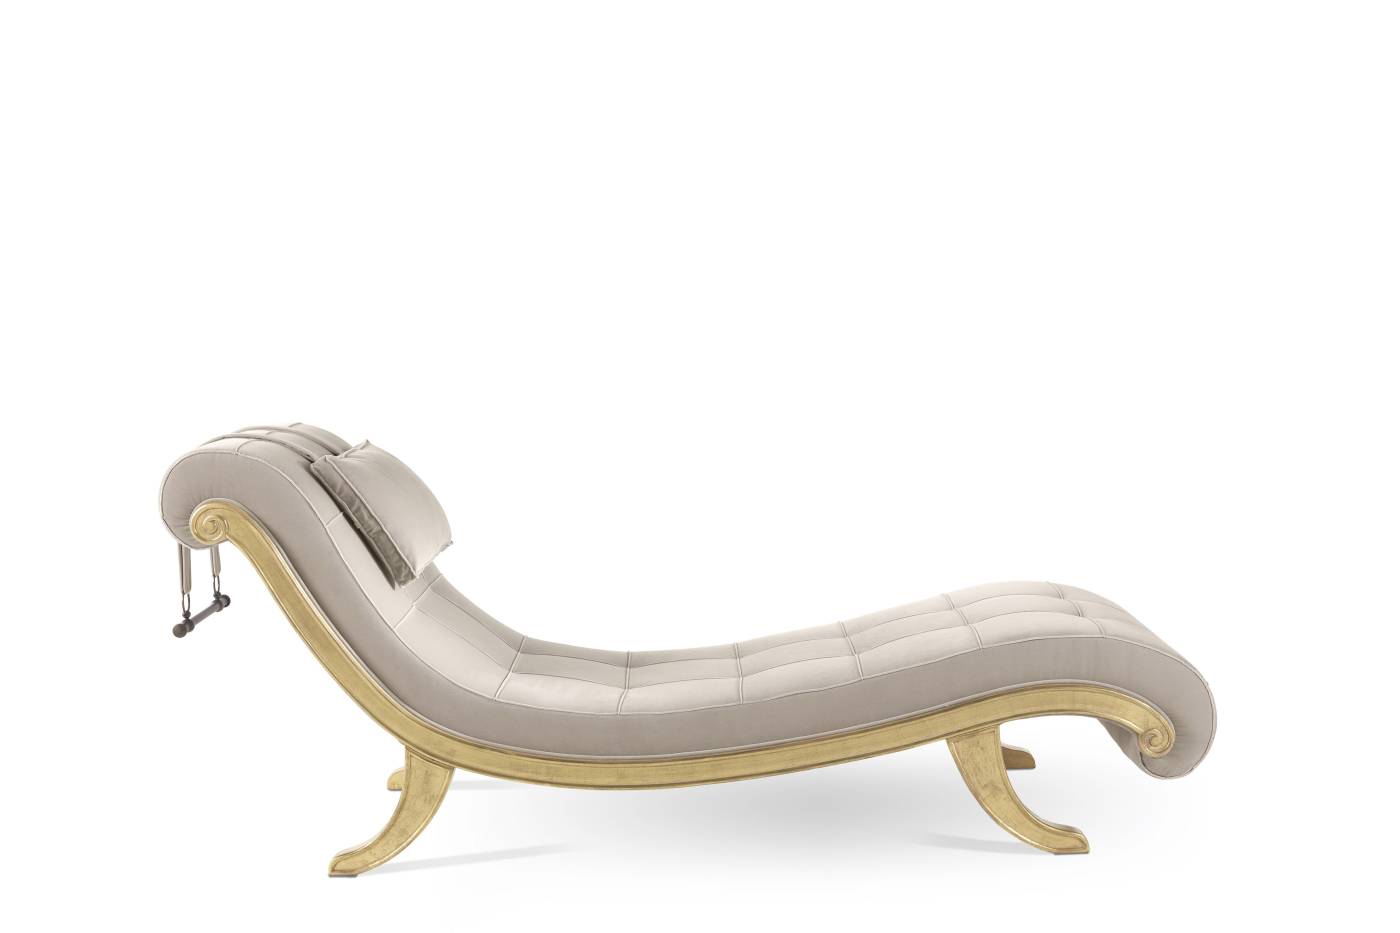 SOPHIE chaise longue – Jumbo Collection Italian luxury classic chaise longues and dormeuses. tailor-made interior design projects to meet all your furnishing needs